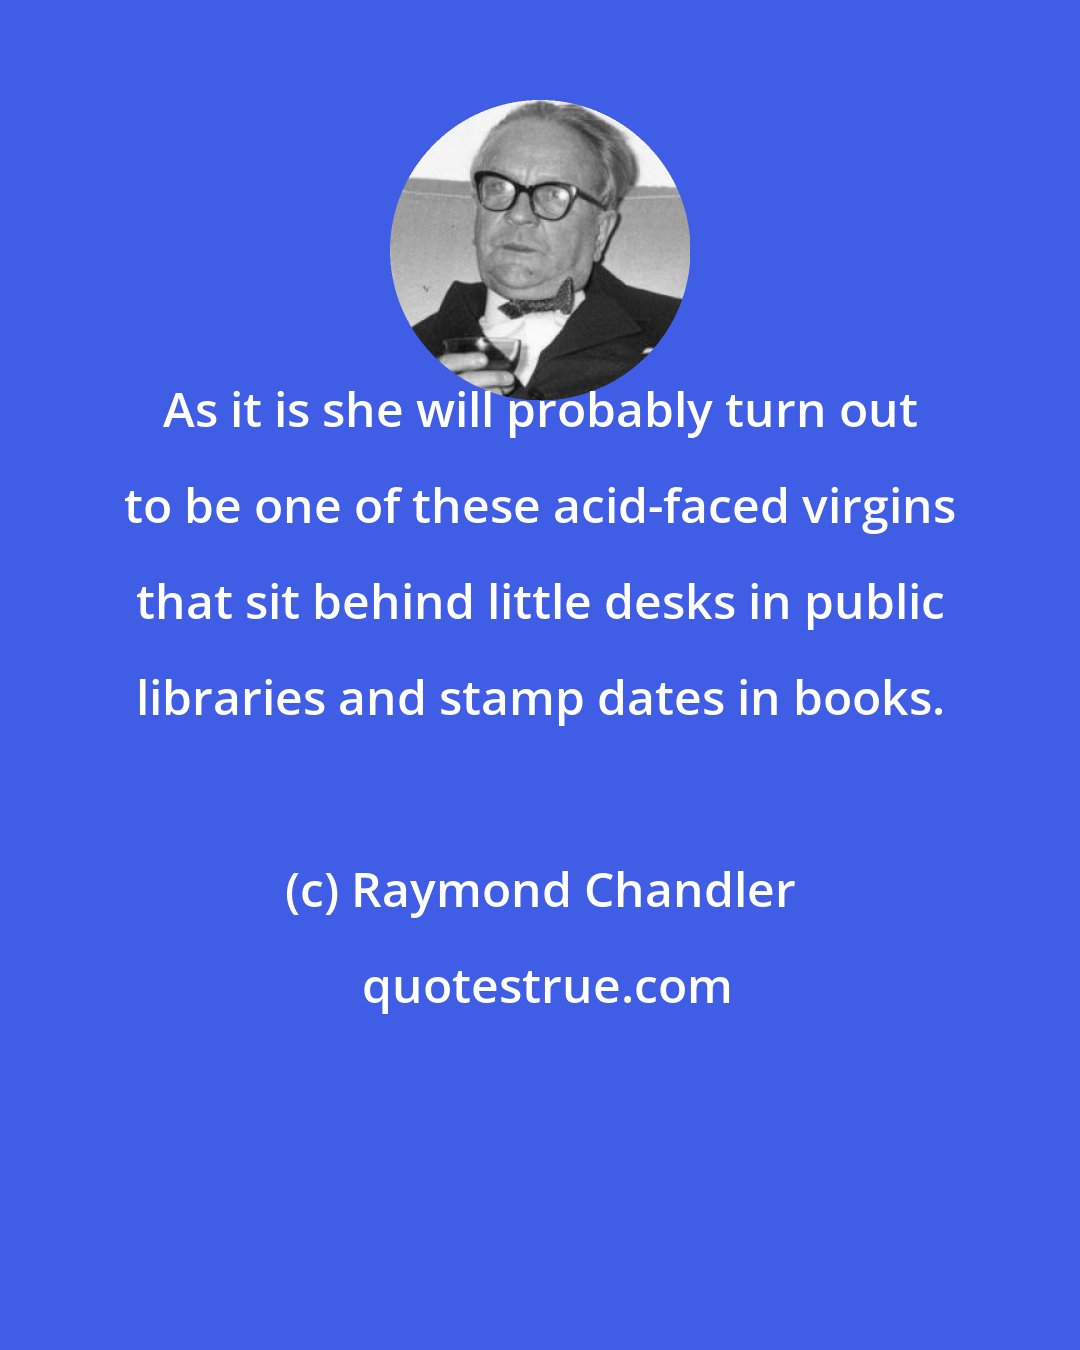 Raymond Chandler: As it is she will probably turn out to be one of these acid-faced virgins that sit behind little desks in public libraries and stamp dates in books.